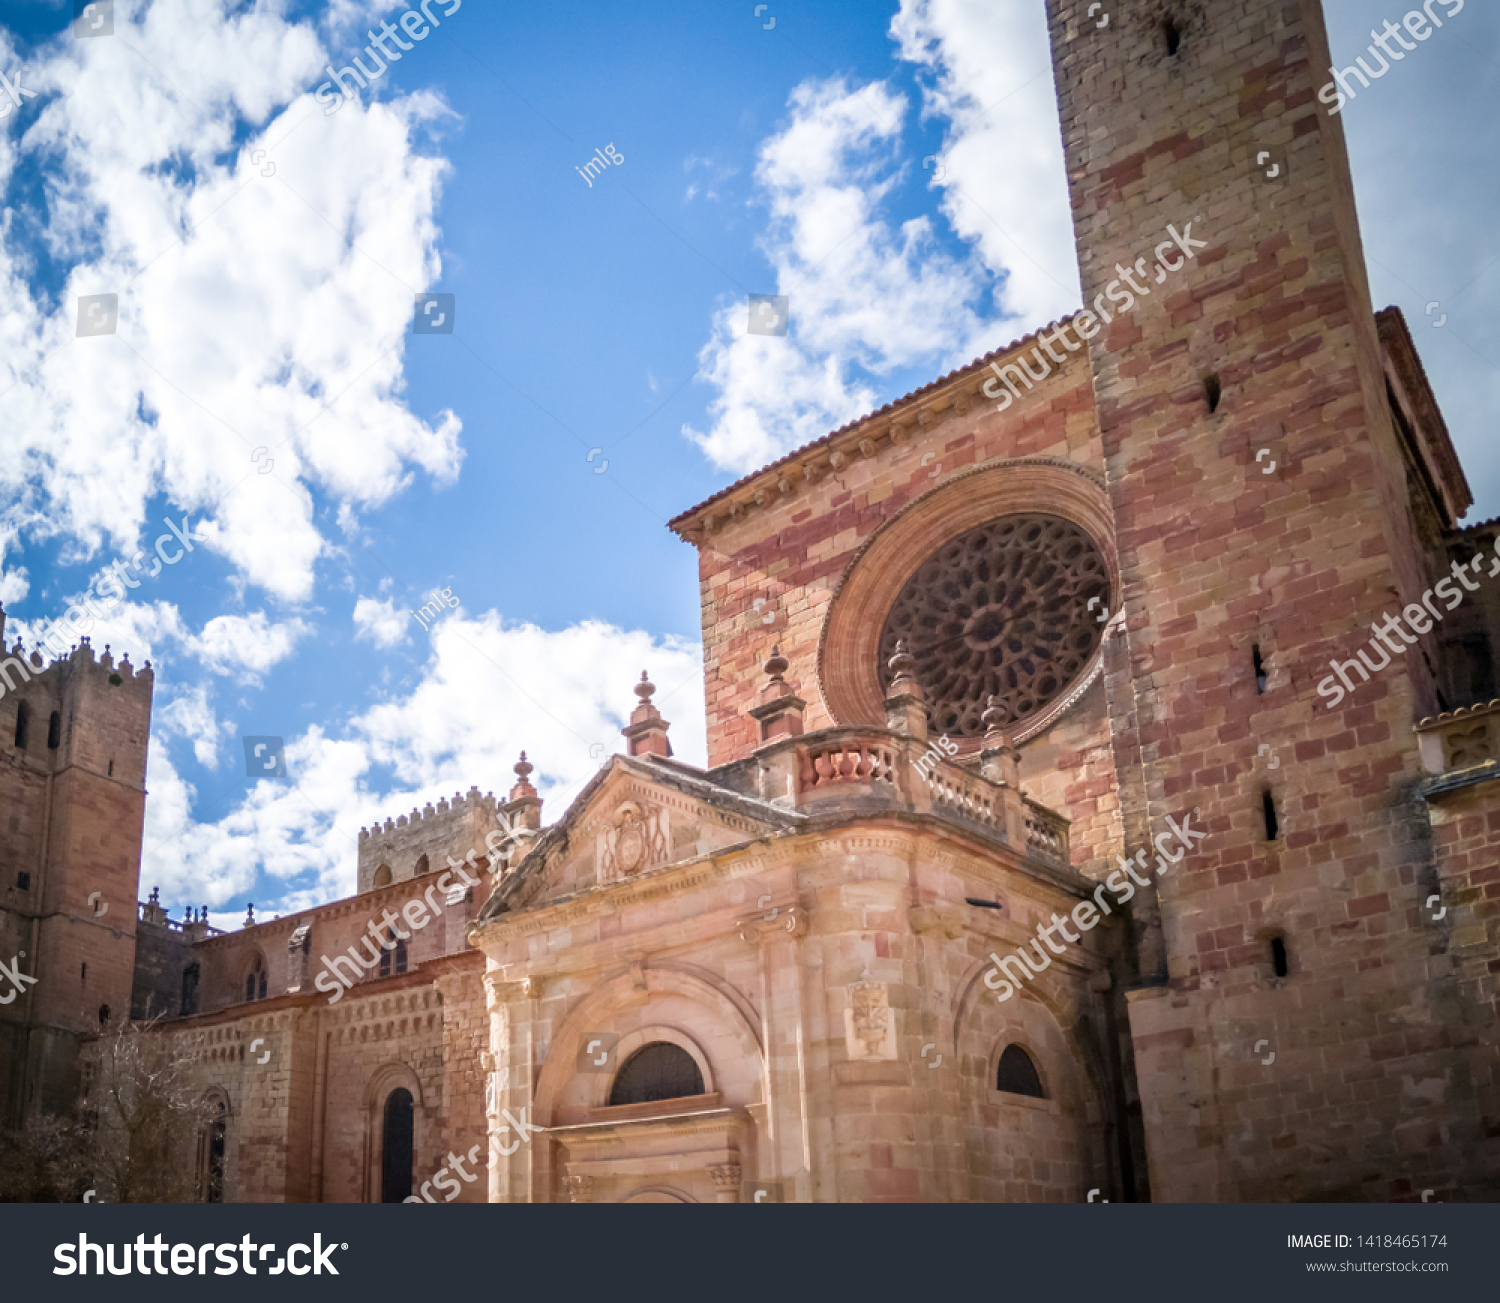 The medieval cathedral of Saint Maria located in Siguenza, Guadalajara in Castilla-la-Mancha region of Spain near Madrid. It was built in  built in Romanesque architectural style. #1418465174